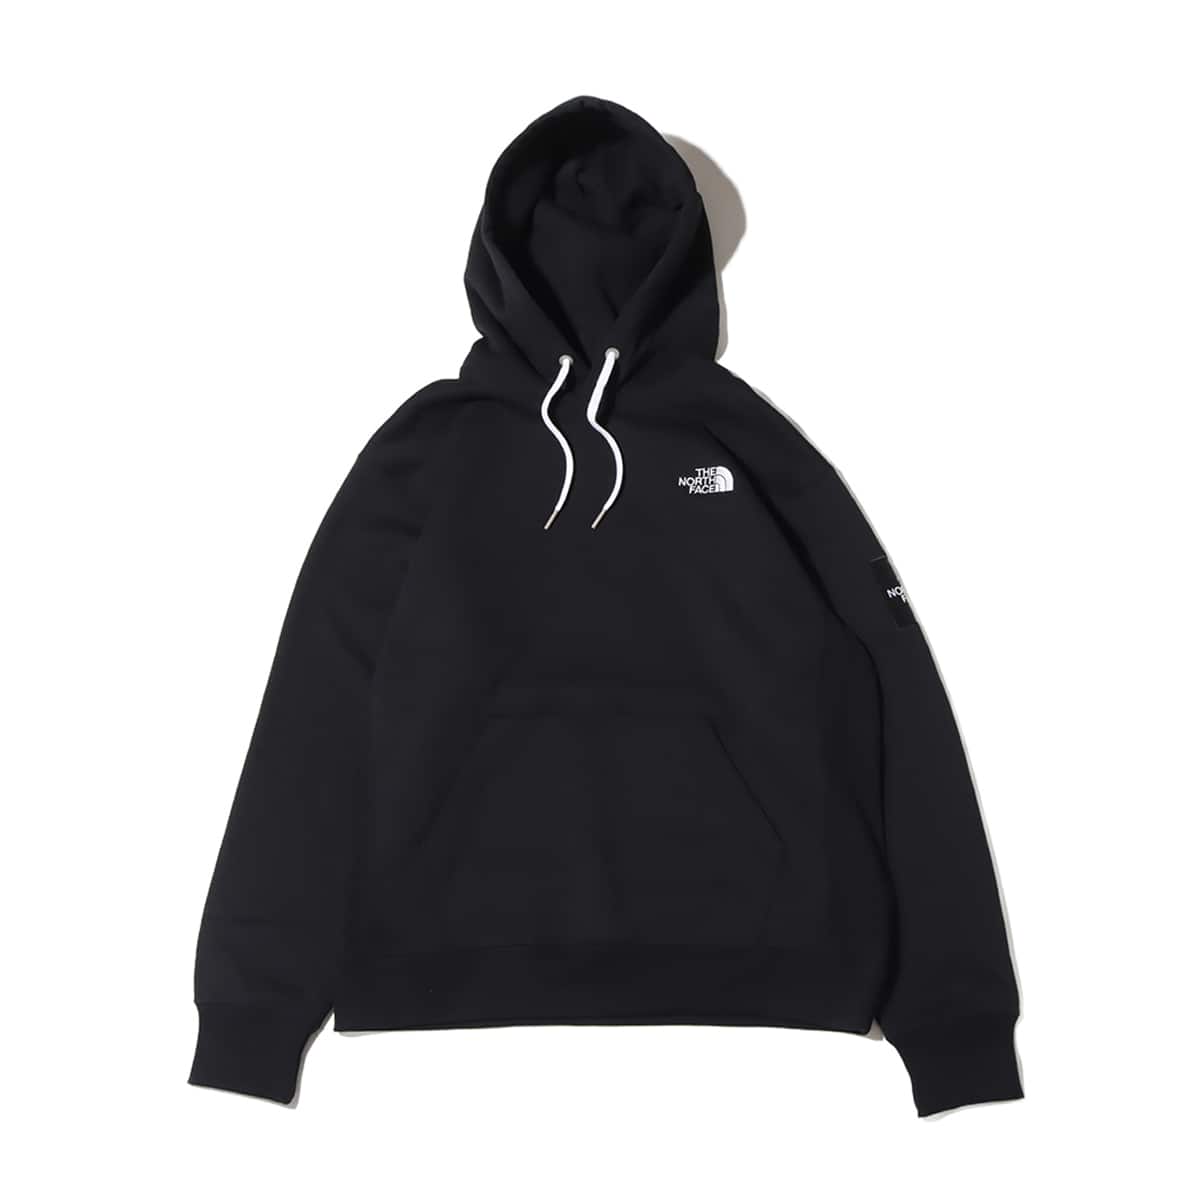 THE NORTH FACE LOGO HOODIE 直営店限定 XL グレートップス - パーカー